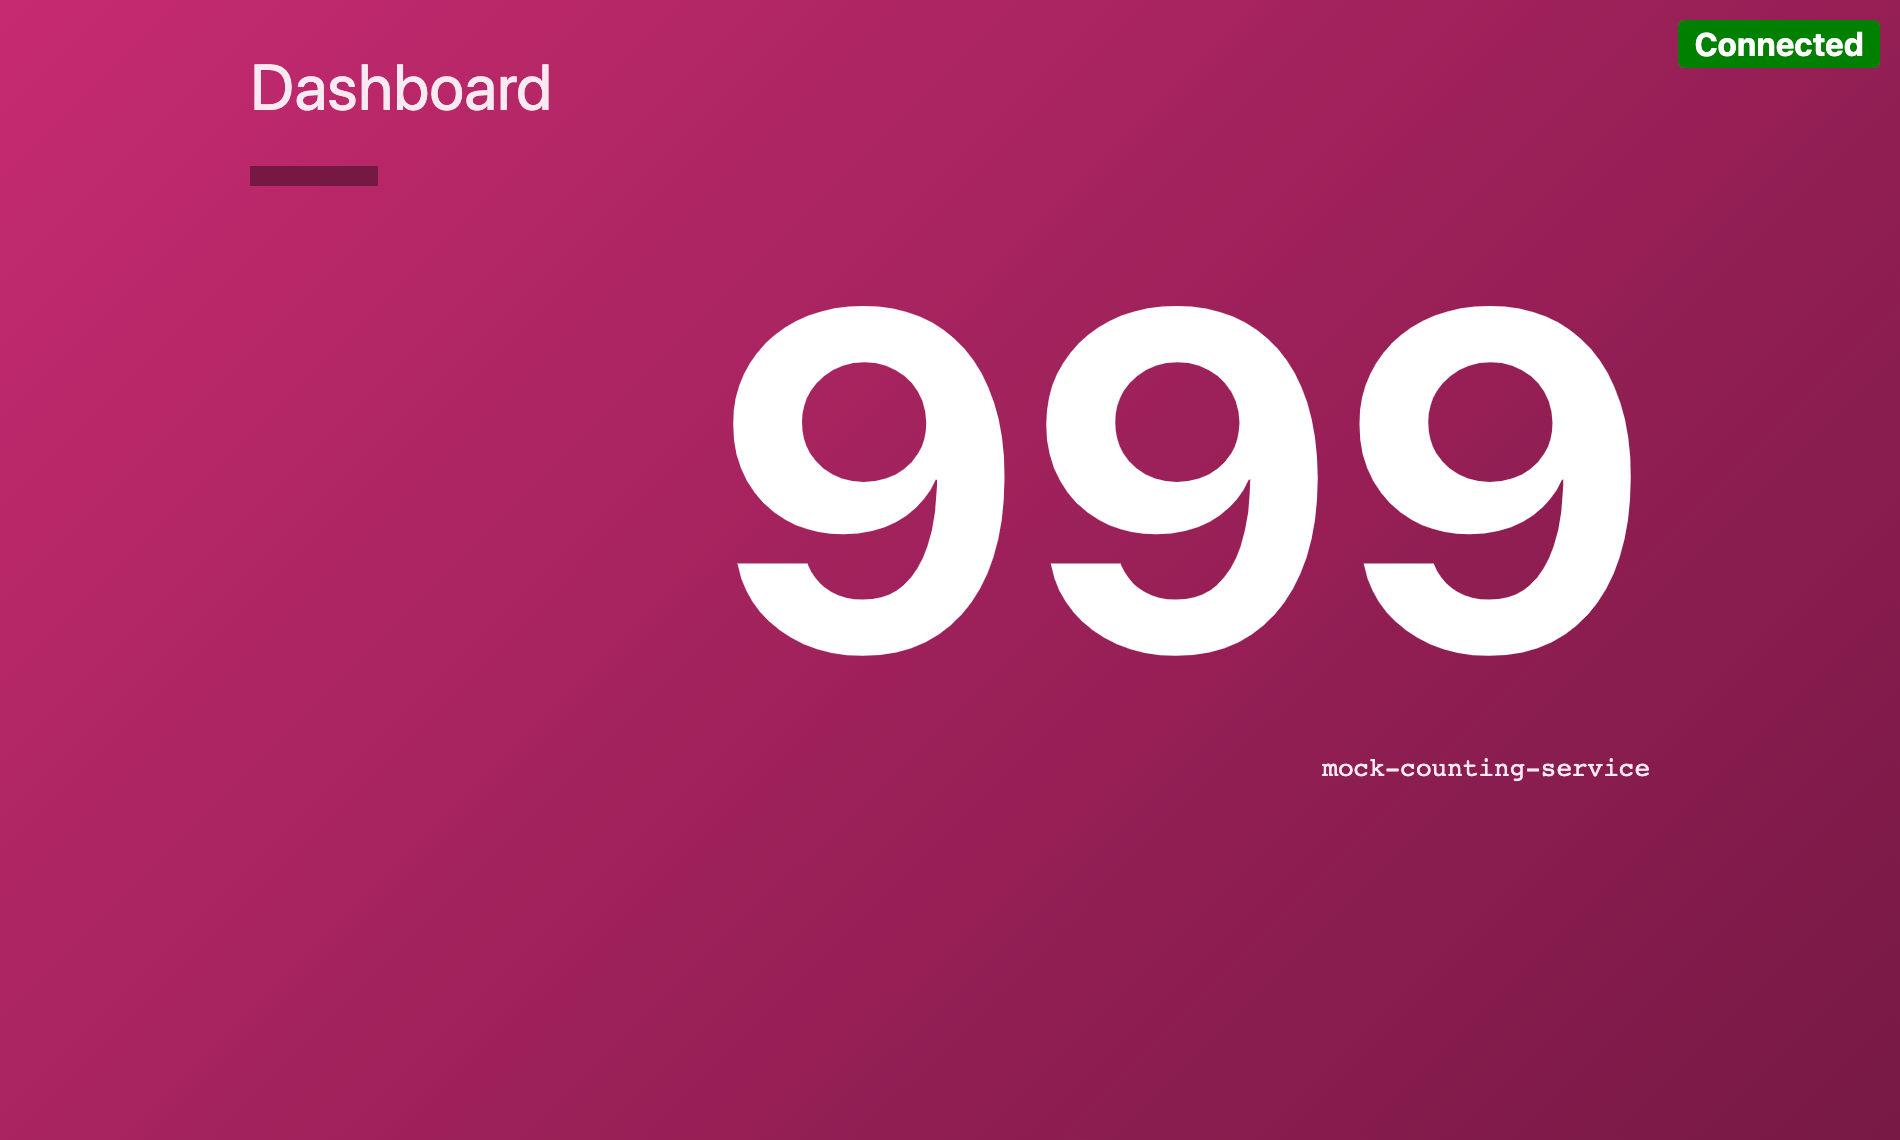 Mock Dashboard Output showing 999